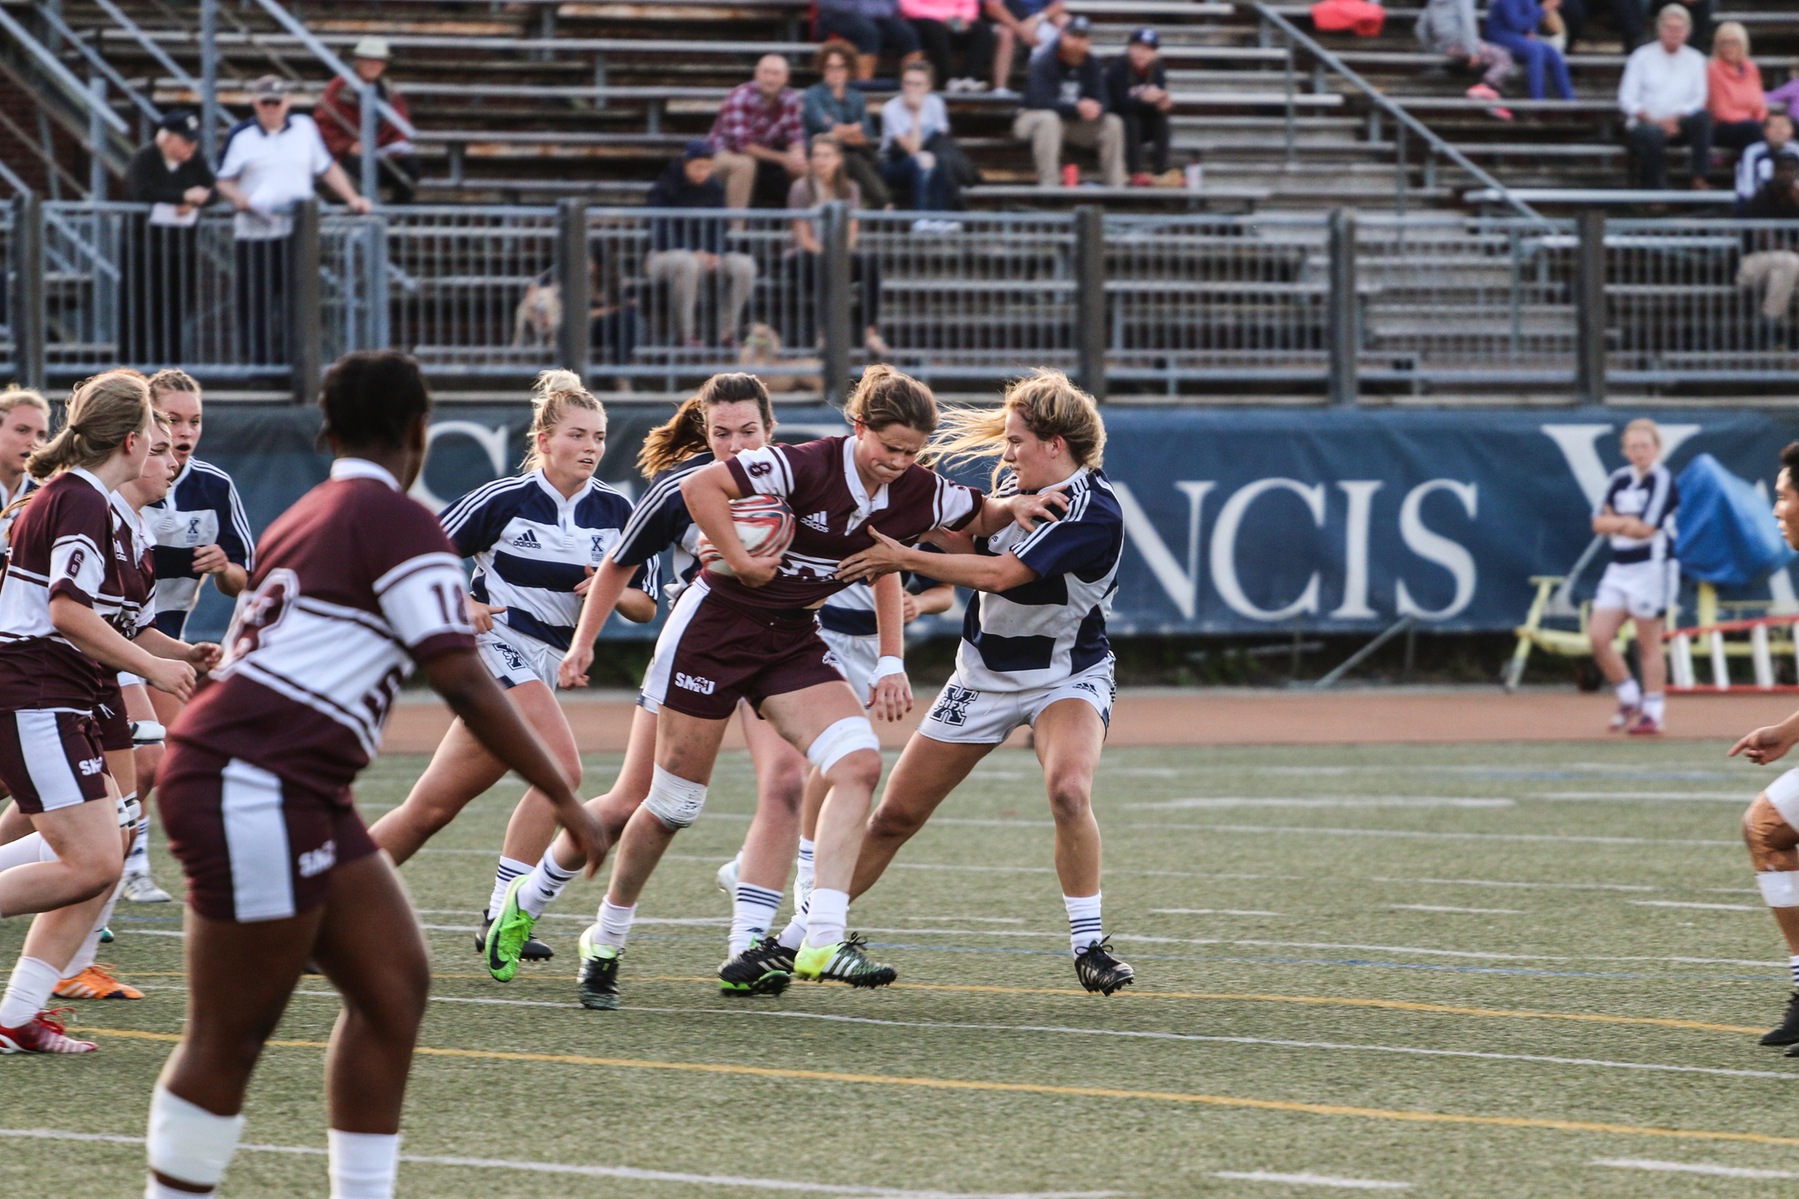 Defending national champs StFX remain strong